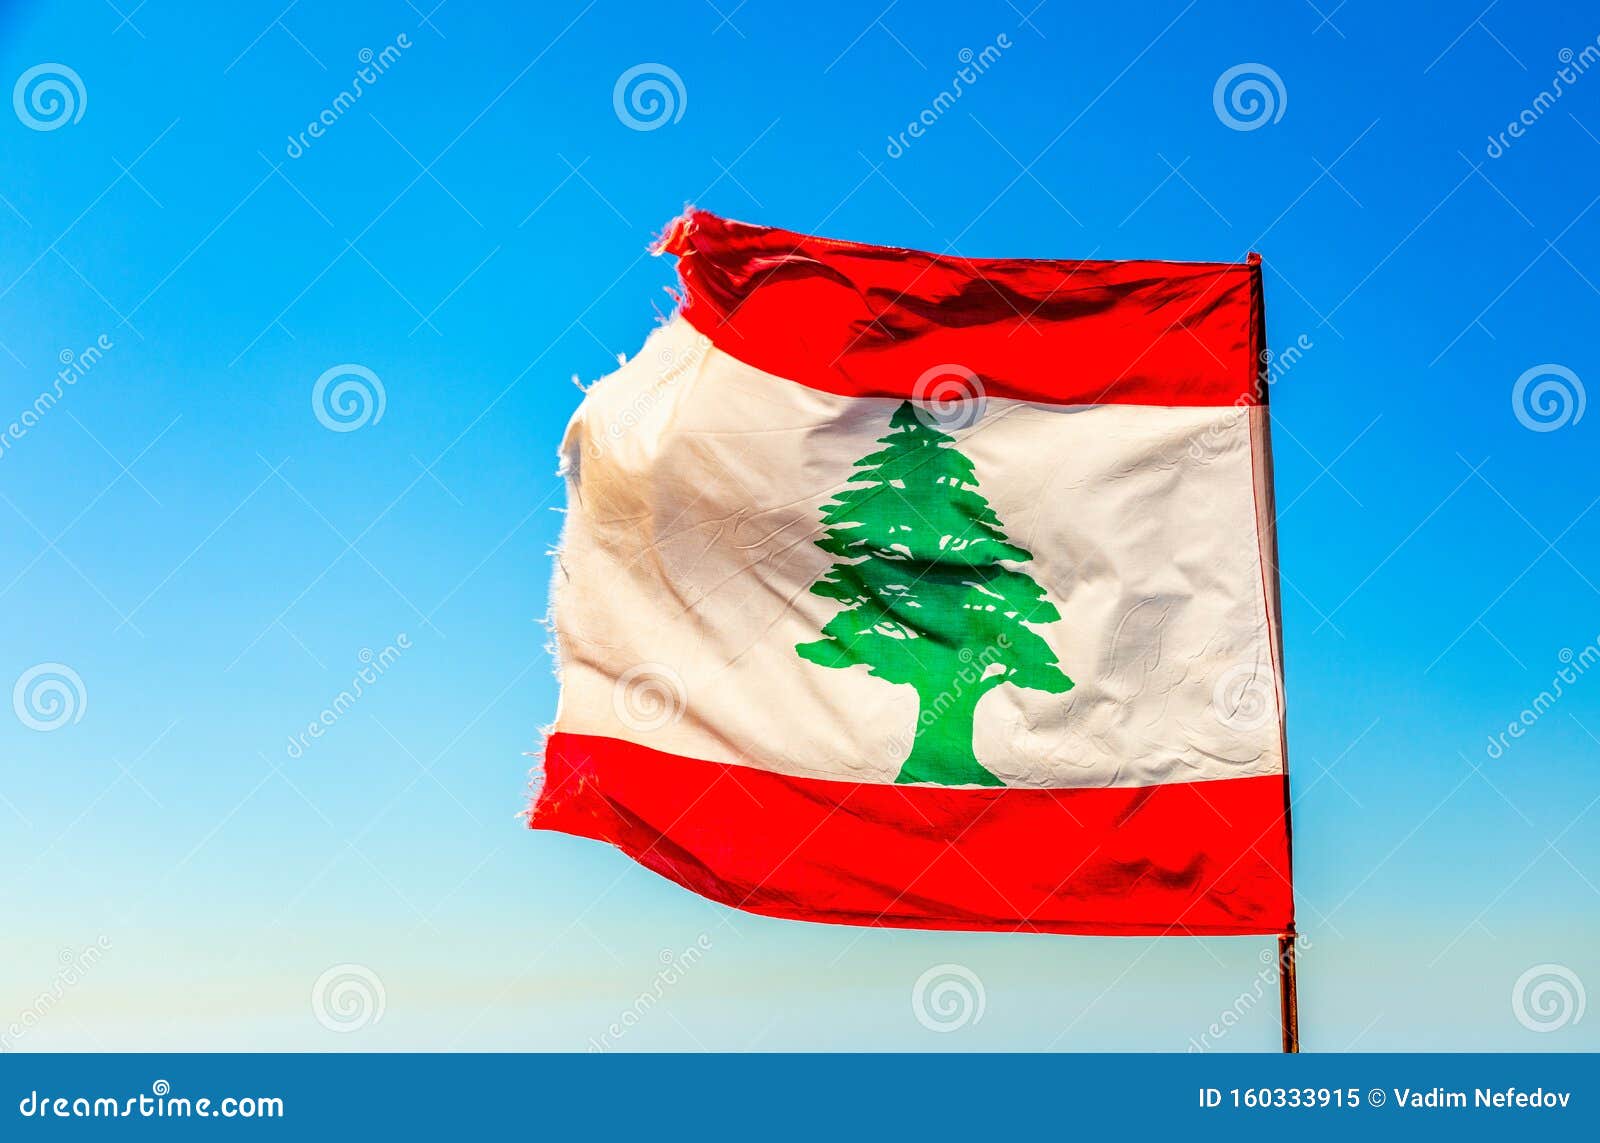 Lebanese Red and White with Green Cedar Tree Flag Waving on the Wind with Blue Sky, Lebanon Stock Image - Image of official, green: